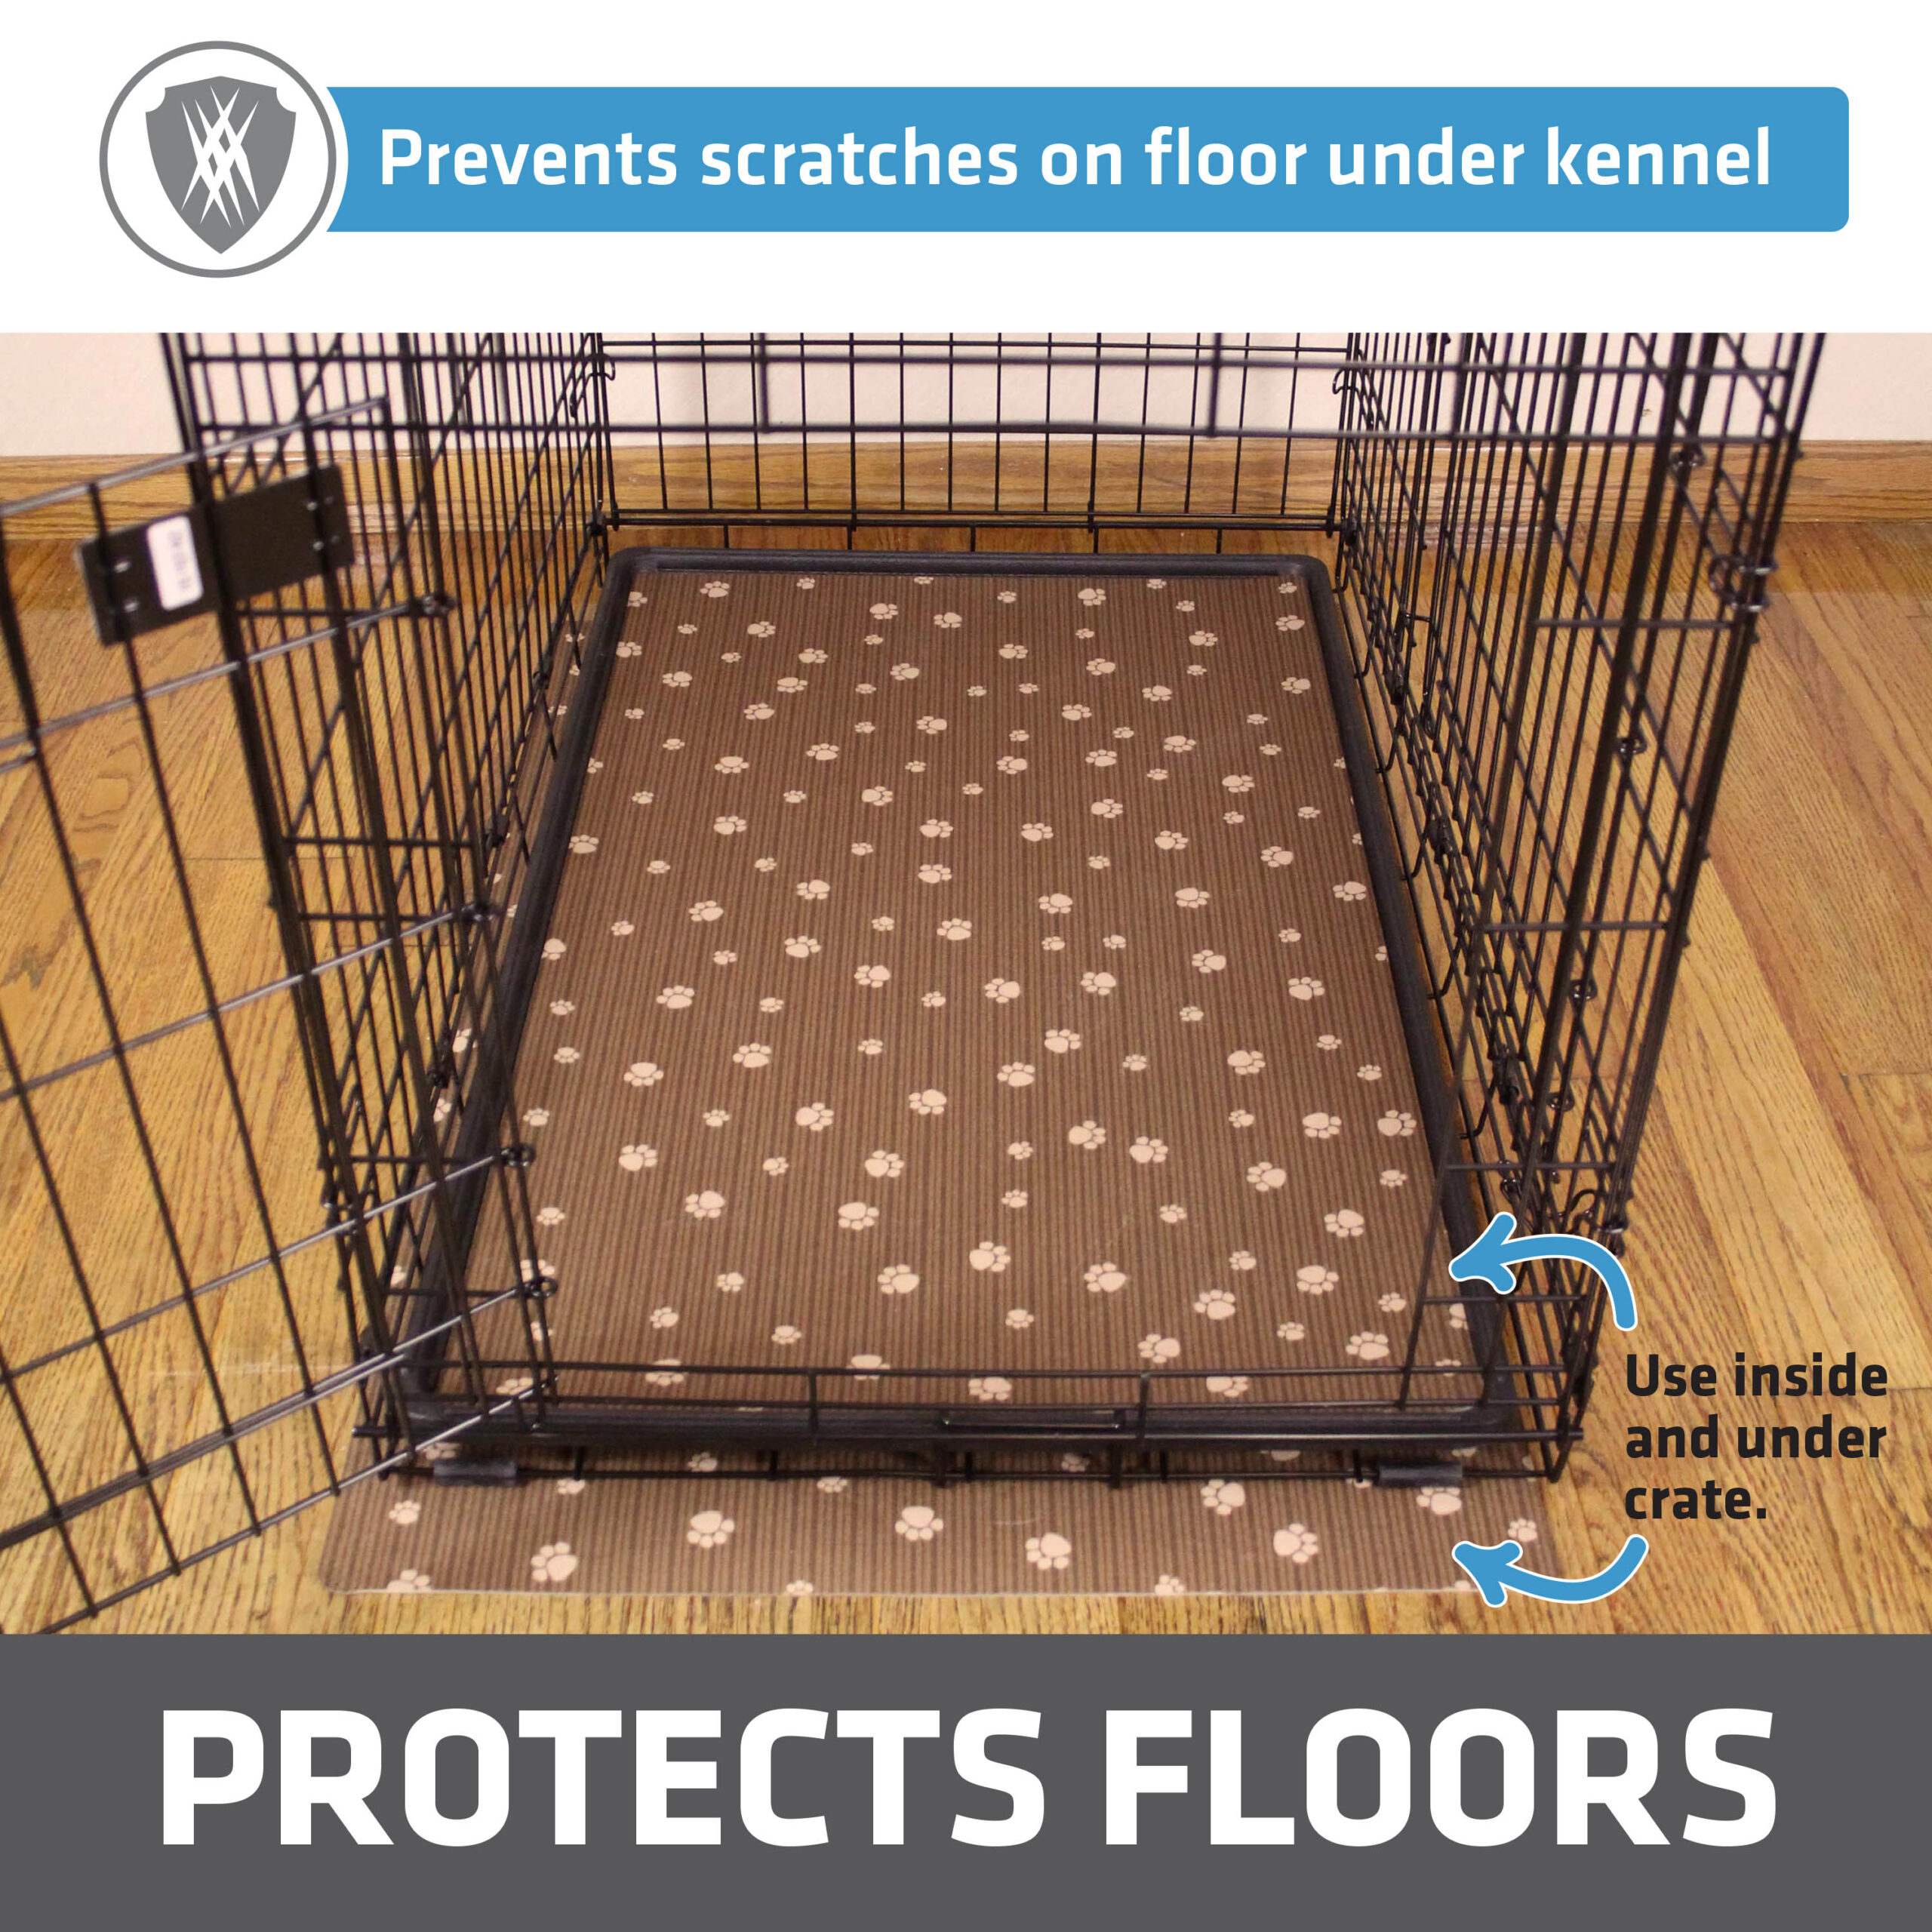 https://drymate.com/wp-content/uploads/2015/07/2-CKP2742MBNSTP-LISTING-dog-crate-mat-liner-pad-kennel-usa-made-pee-pads-puppy-pets-potty-cage-absorbent-travel-waterproof-washable-scaled.jpg